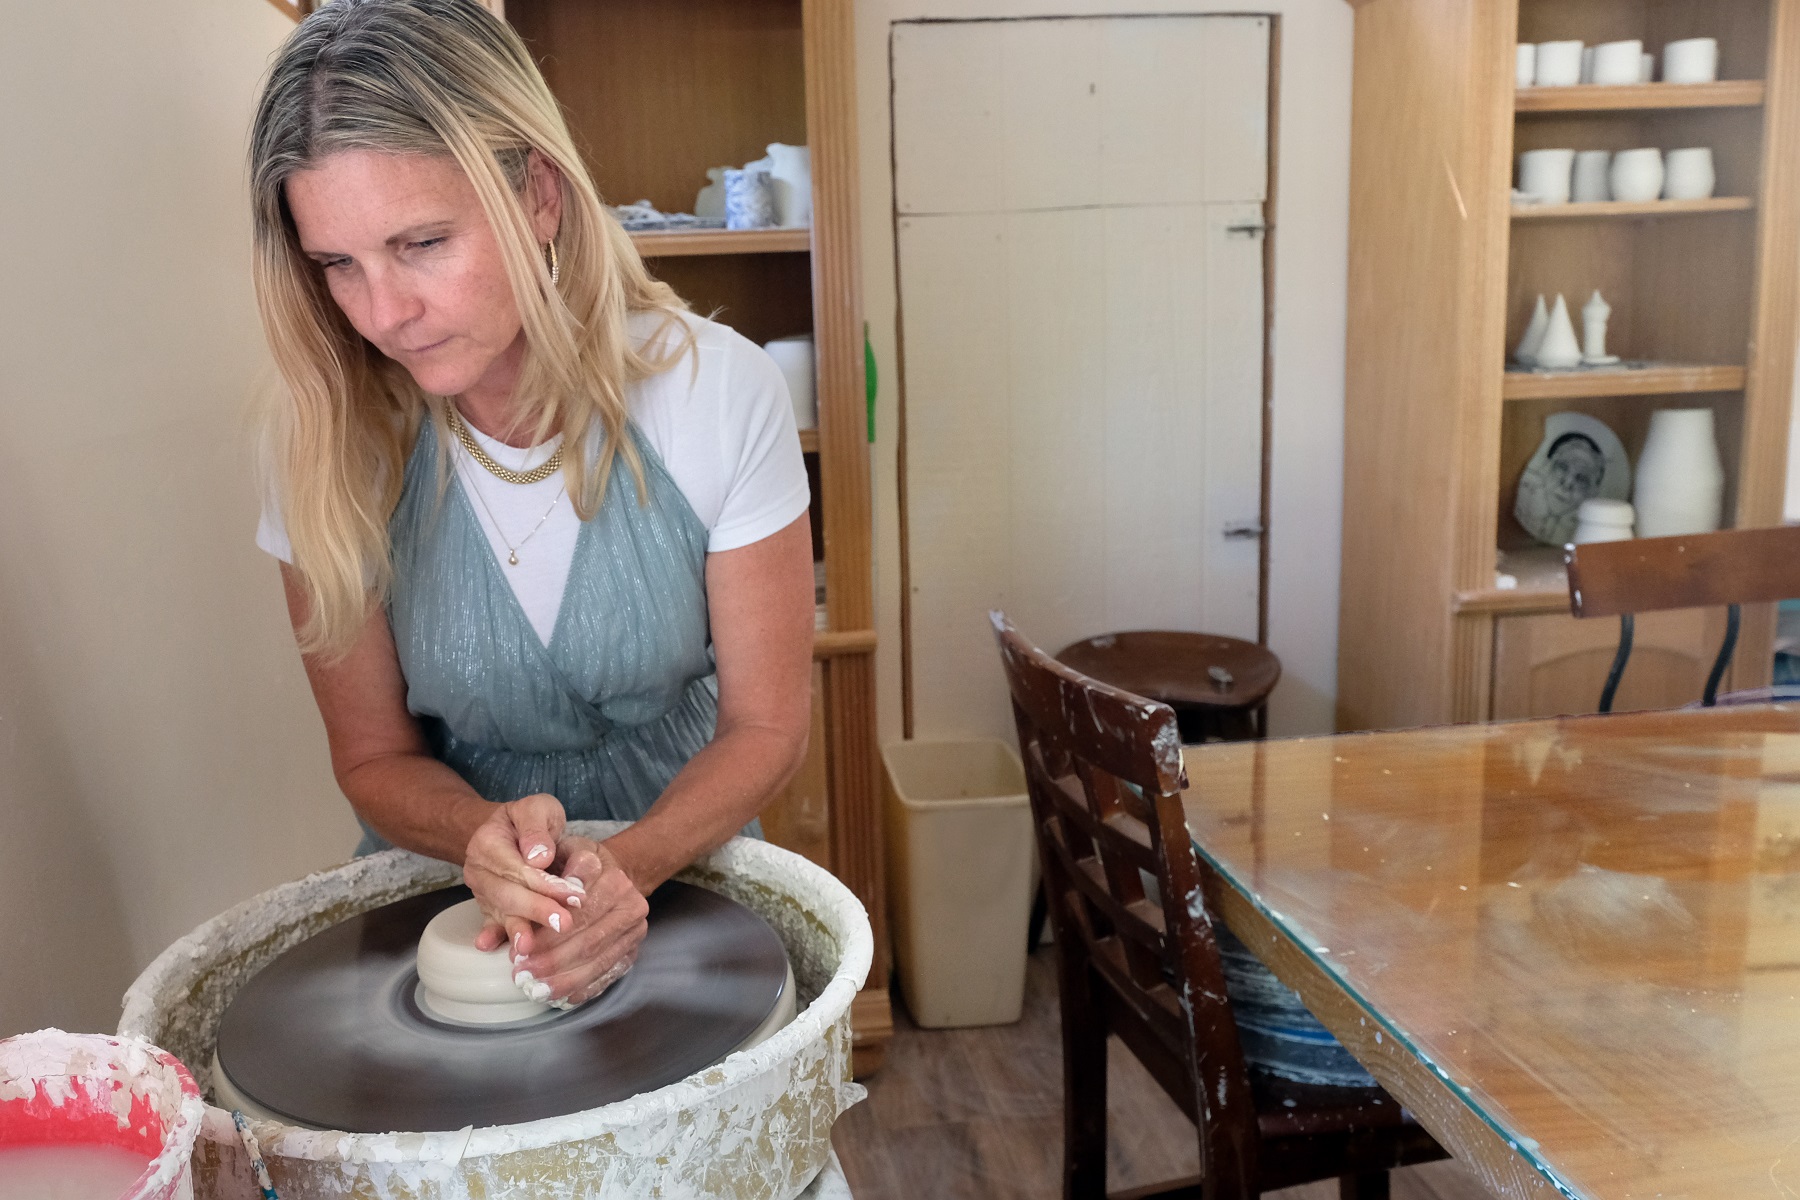 Porcelain artist Debra Aase Farnum will use the fellowship to step out of this comfort zone, her backyard studio, to explore the ceramic work of artists in her ancestral country, Norway.